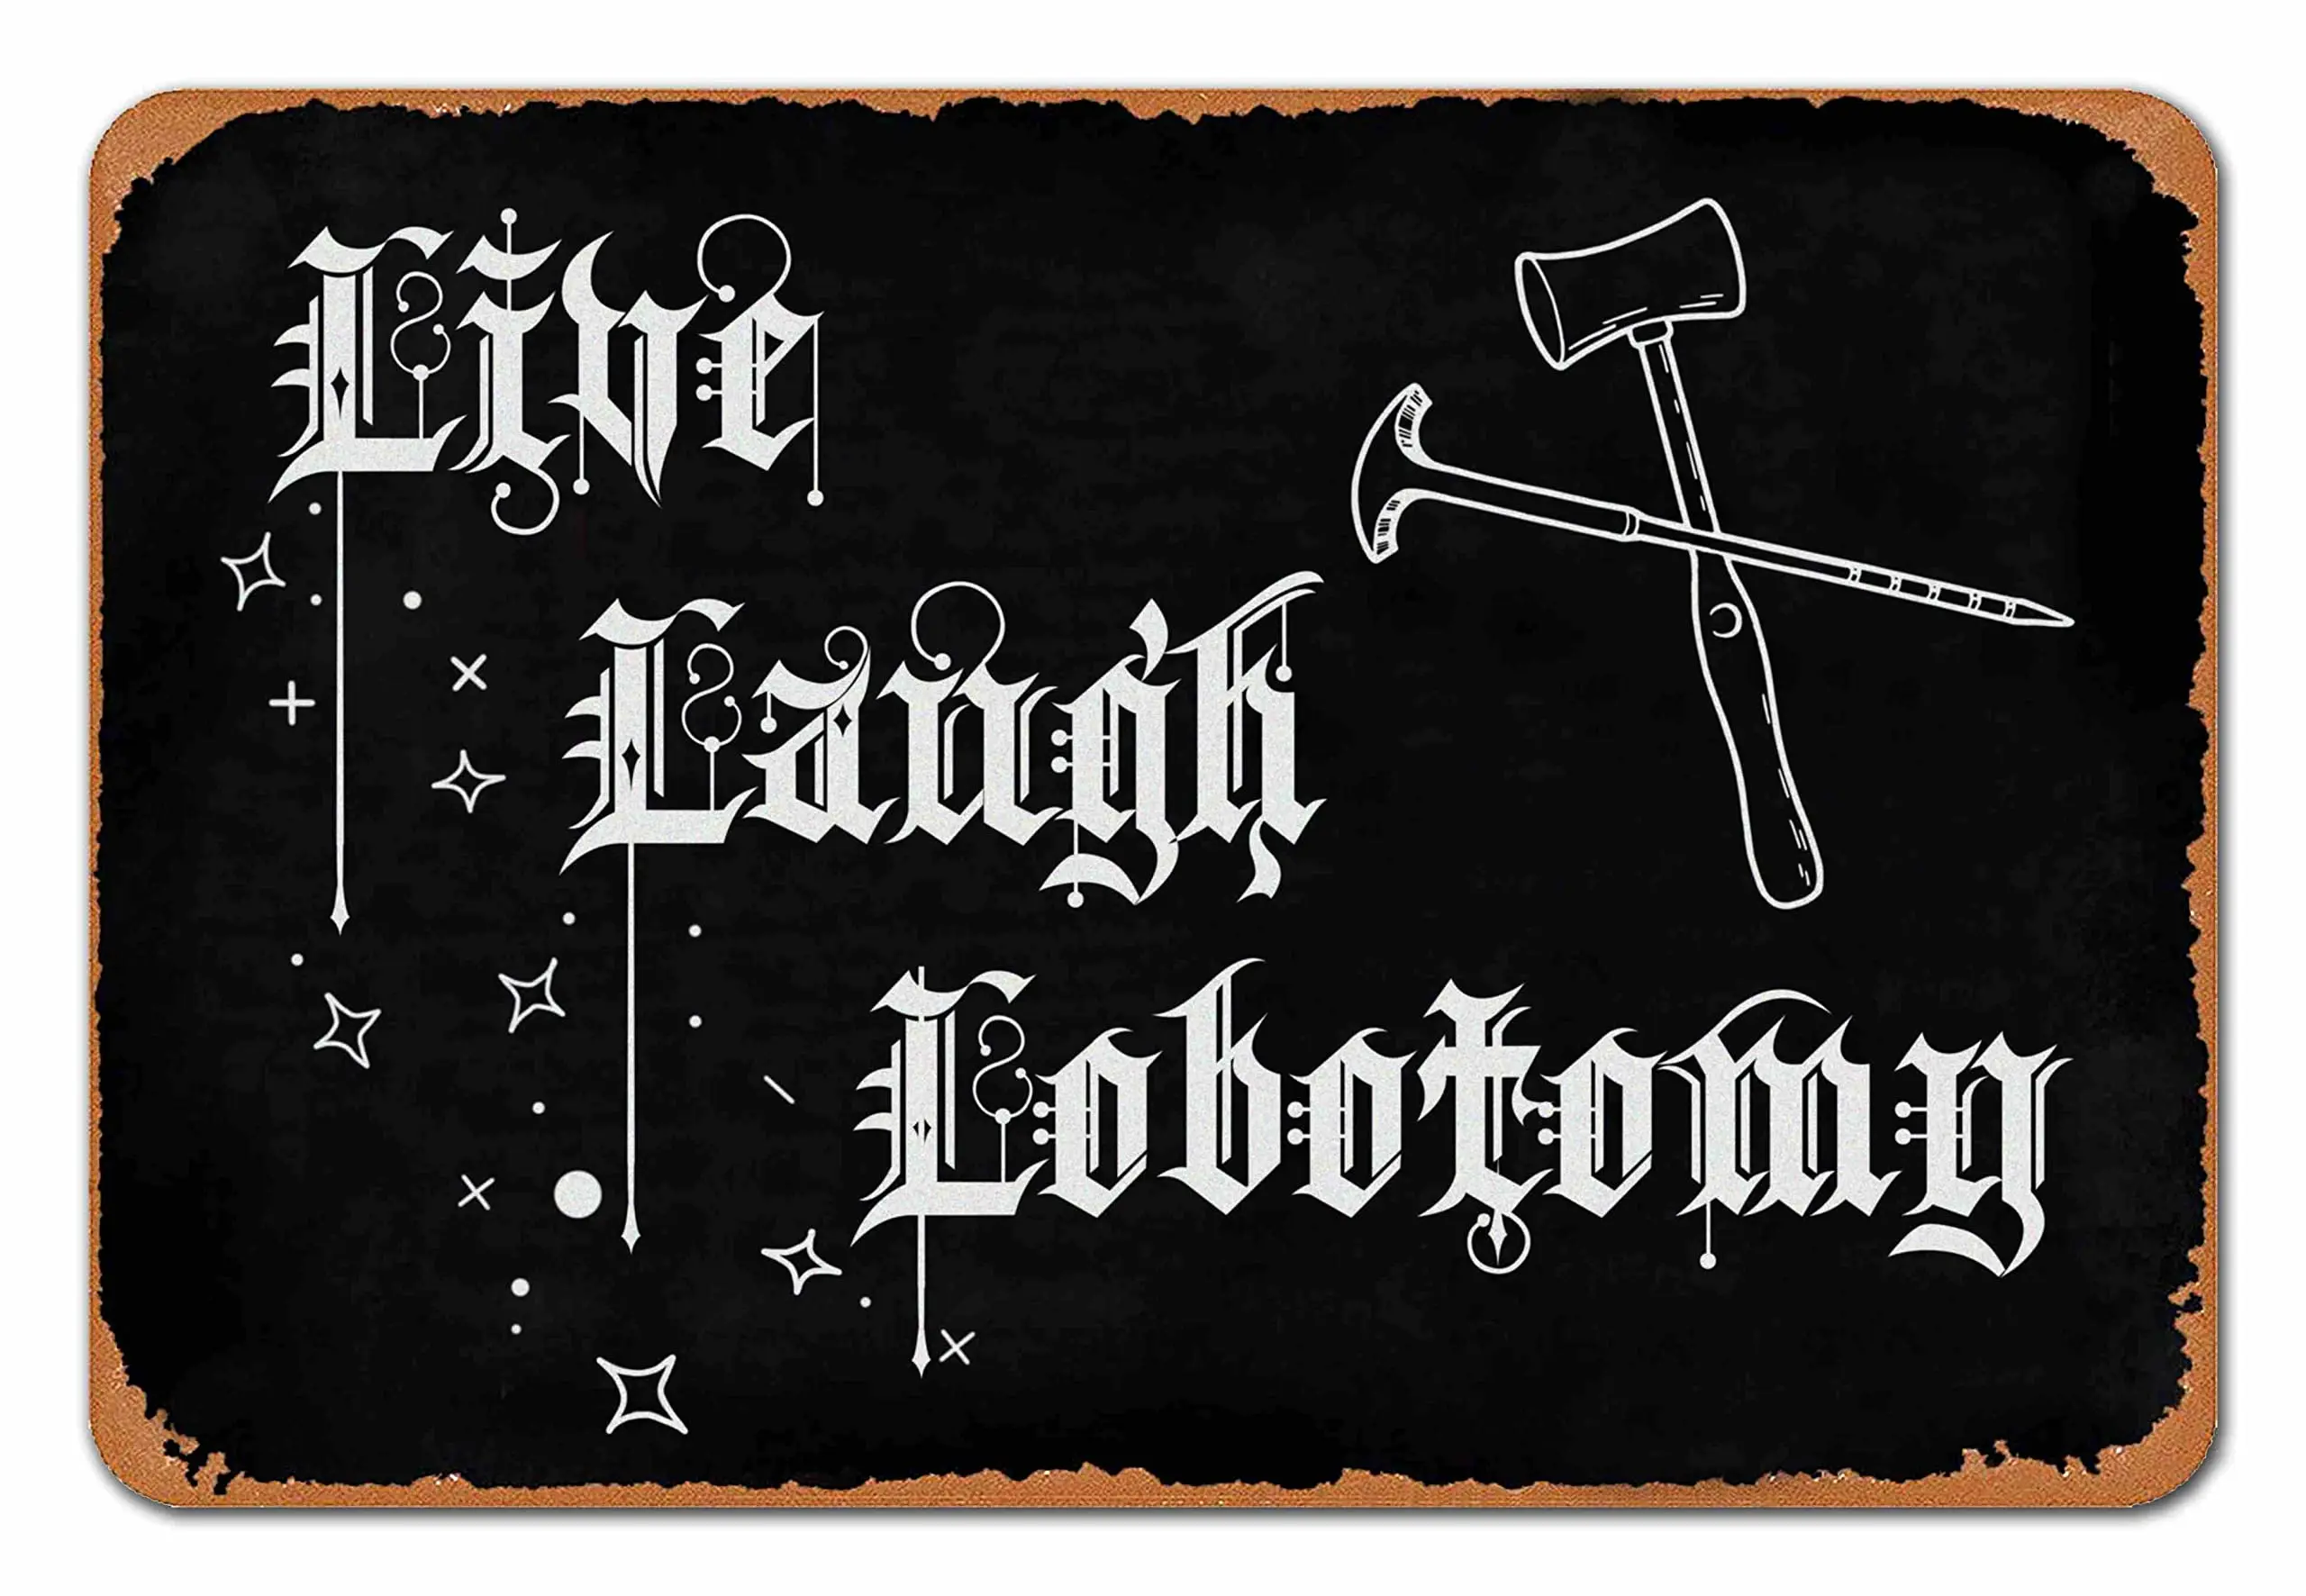 

Funny Dark Humor Goth Halloween Wall Decor Live Laugh Lobotomy Sign For Gothic Room, Home, Bedroom, Bathroom